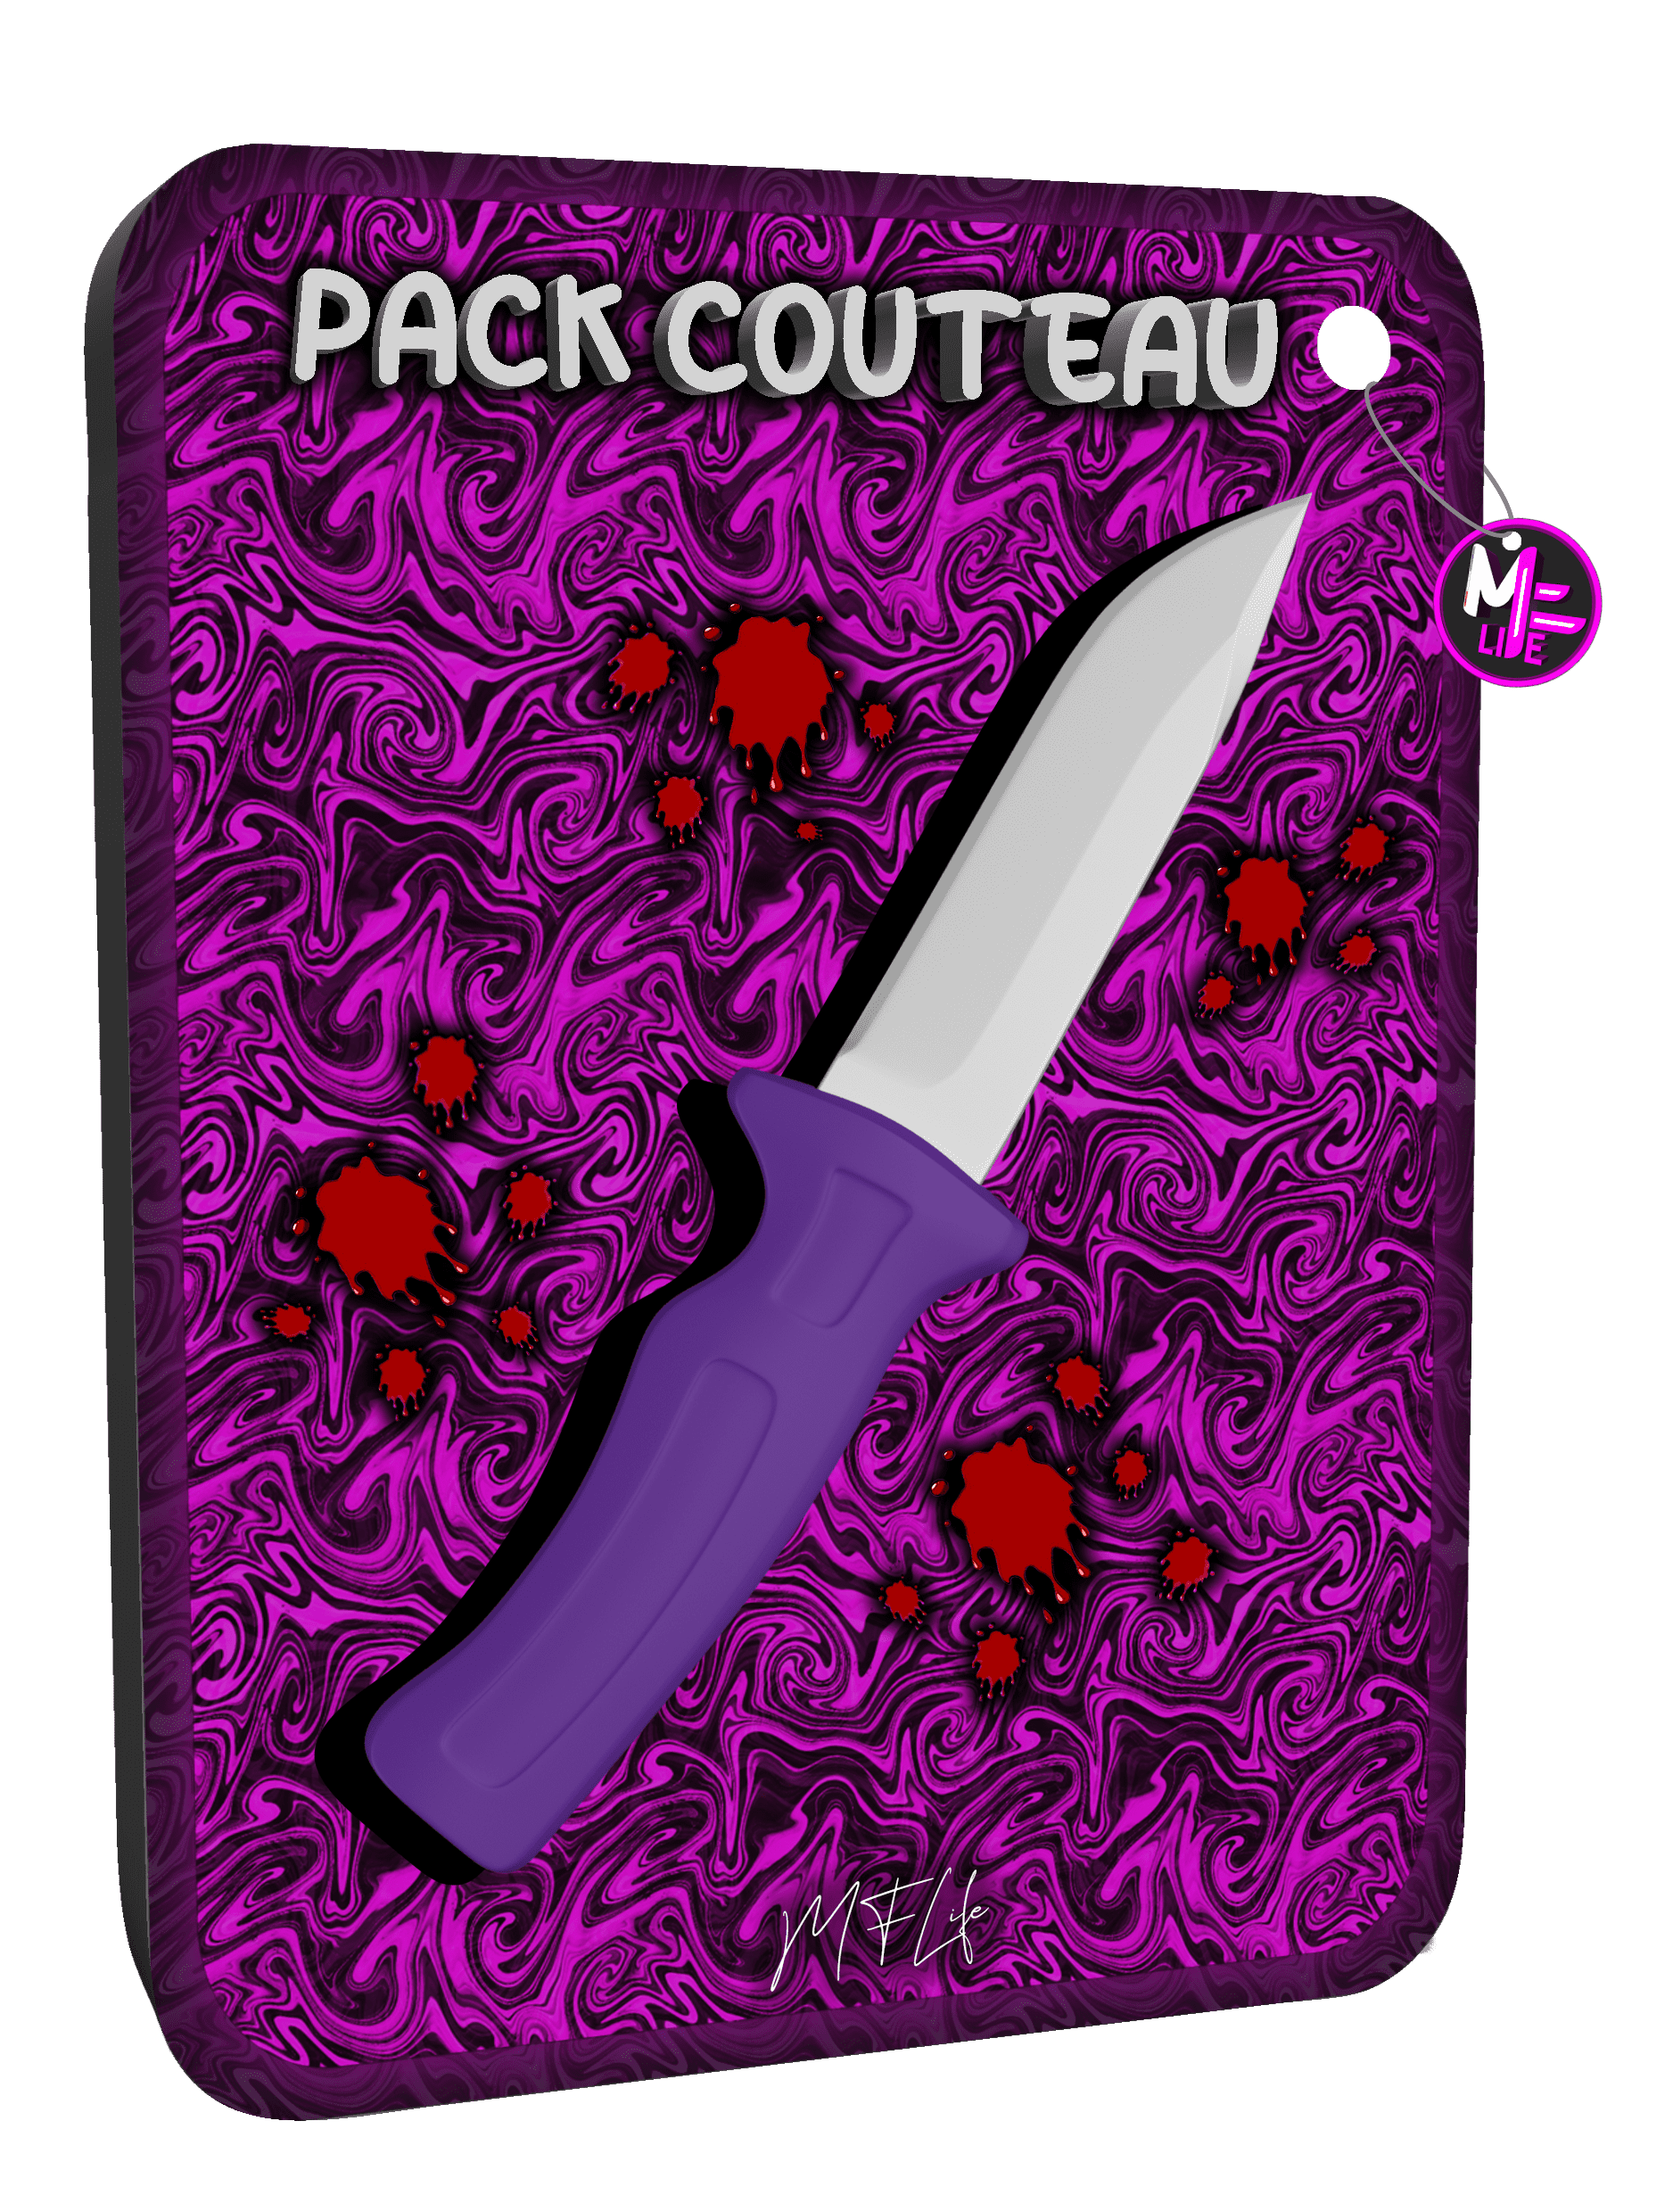 Pack Couteau